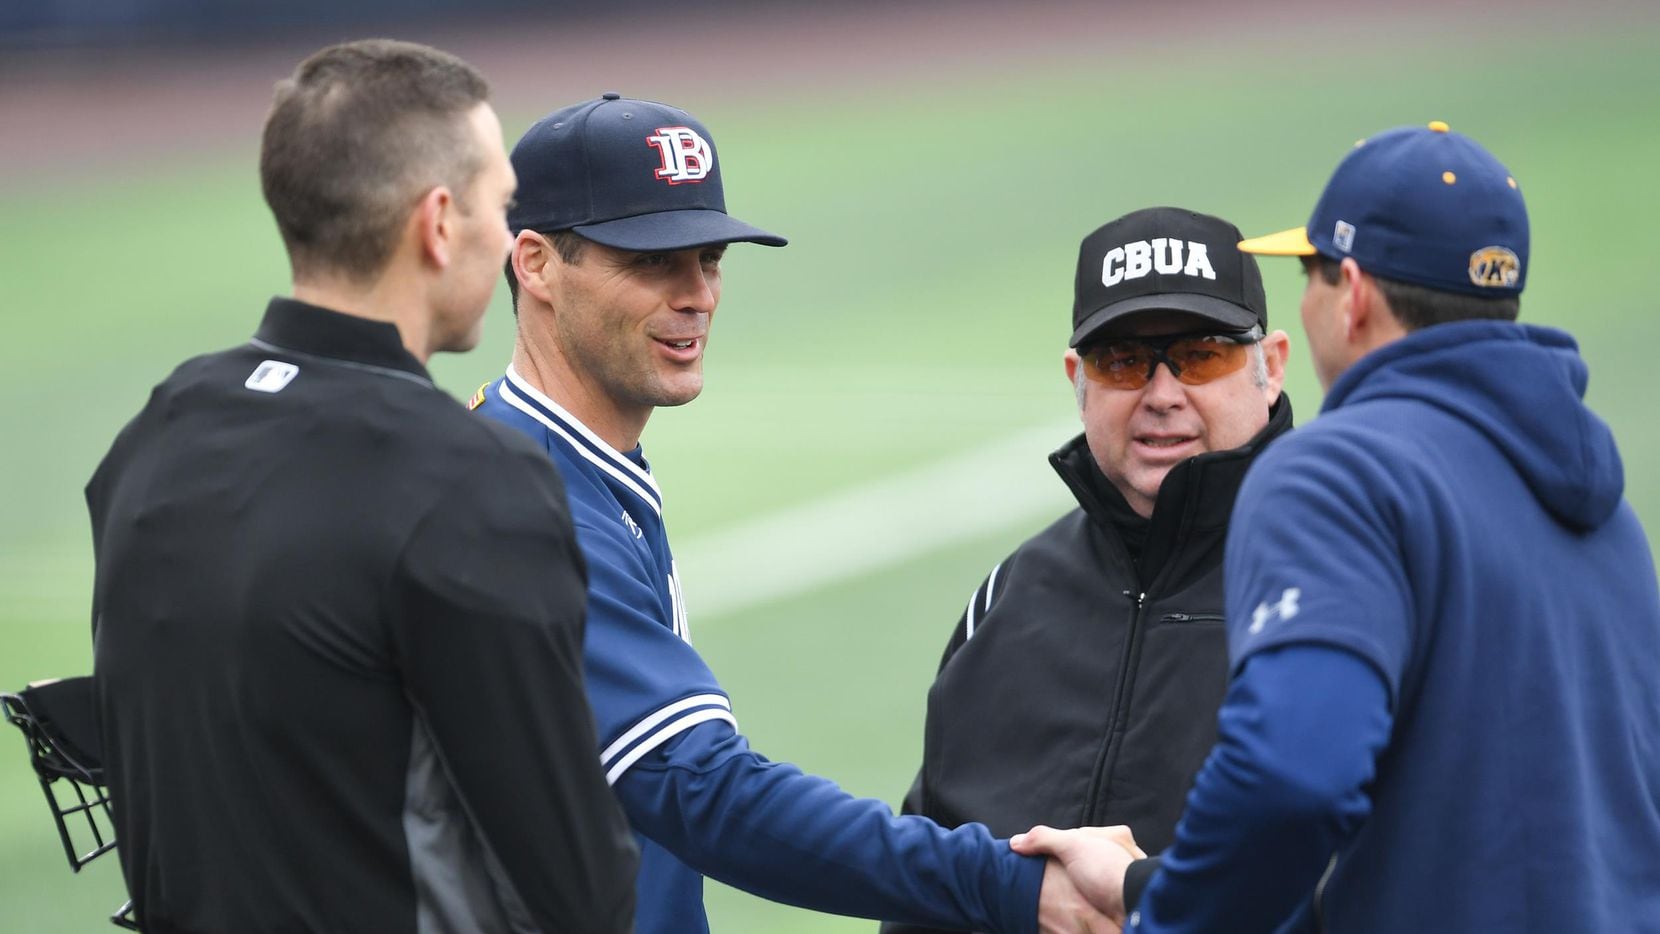 Dallas Baptist head coach Dan Heefner greets the opposing coach and umpires at home plate....